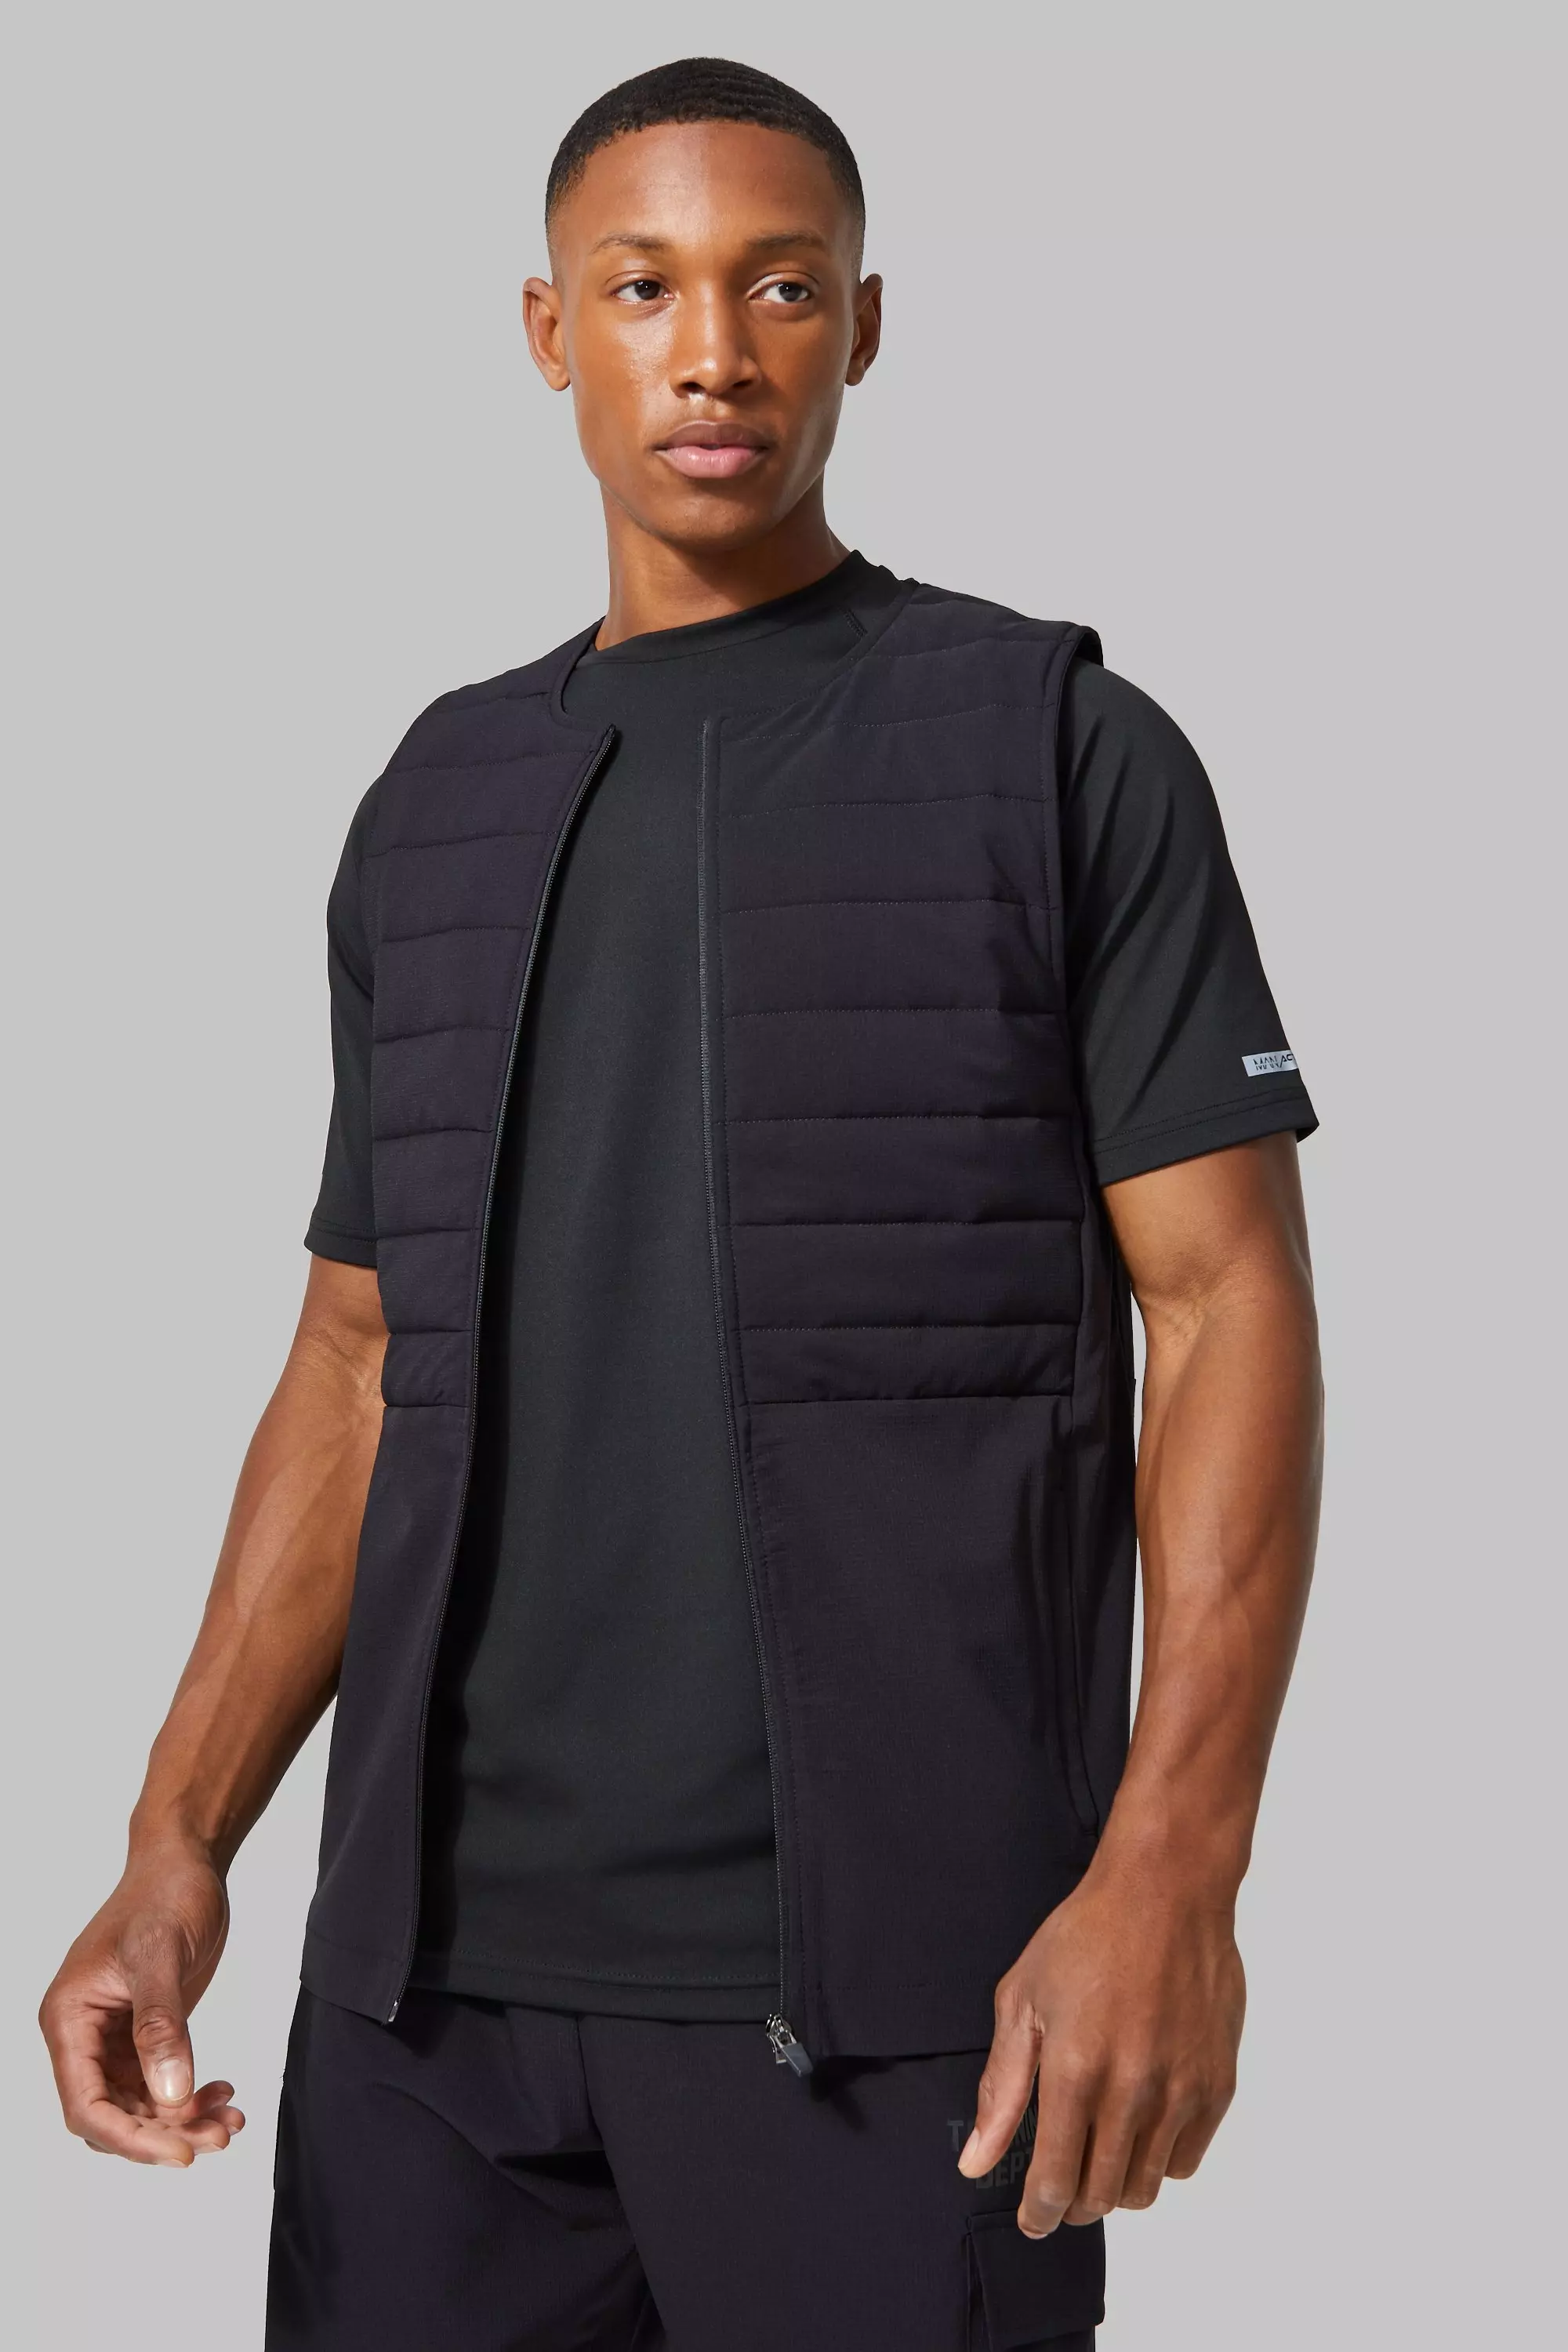 Active Training Dept Quilted Body Warmer Black